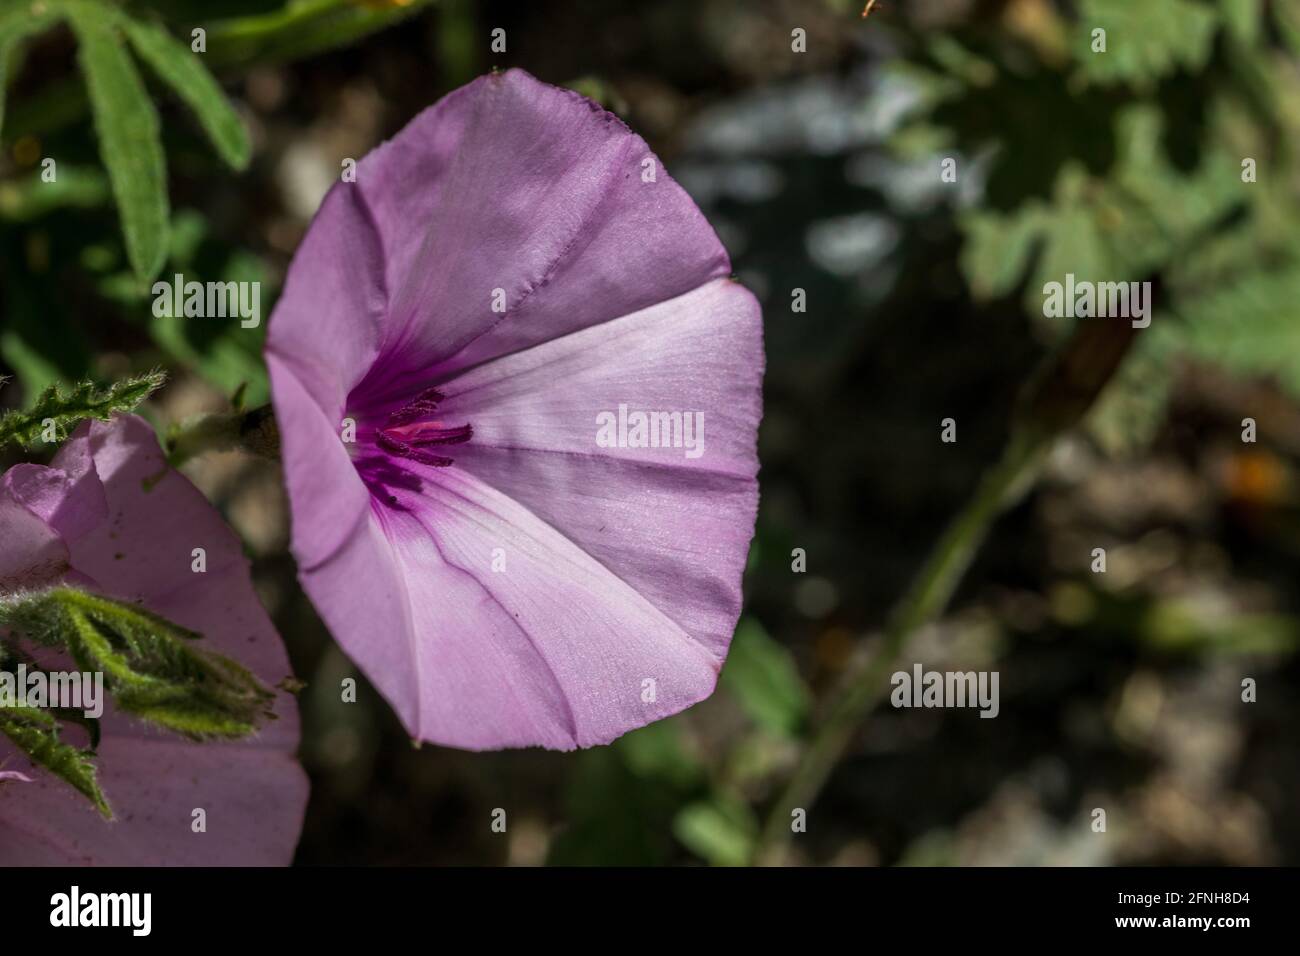 Convolvulus althaeoides, Mallow-leaved bindweed Plant in Flower Stock Photo